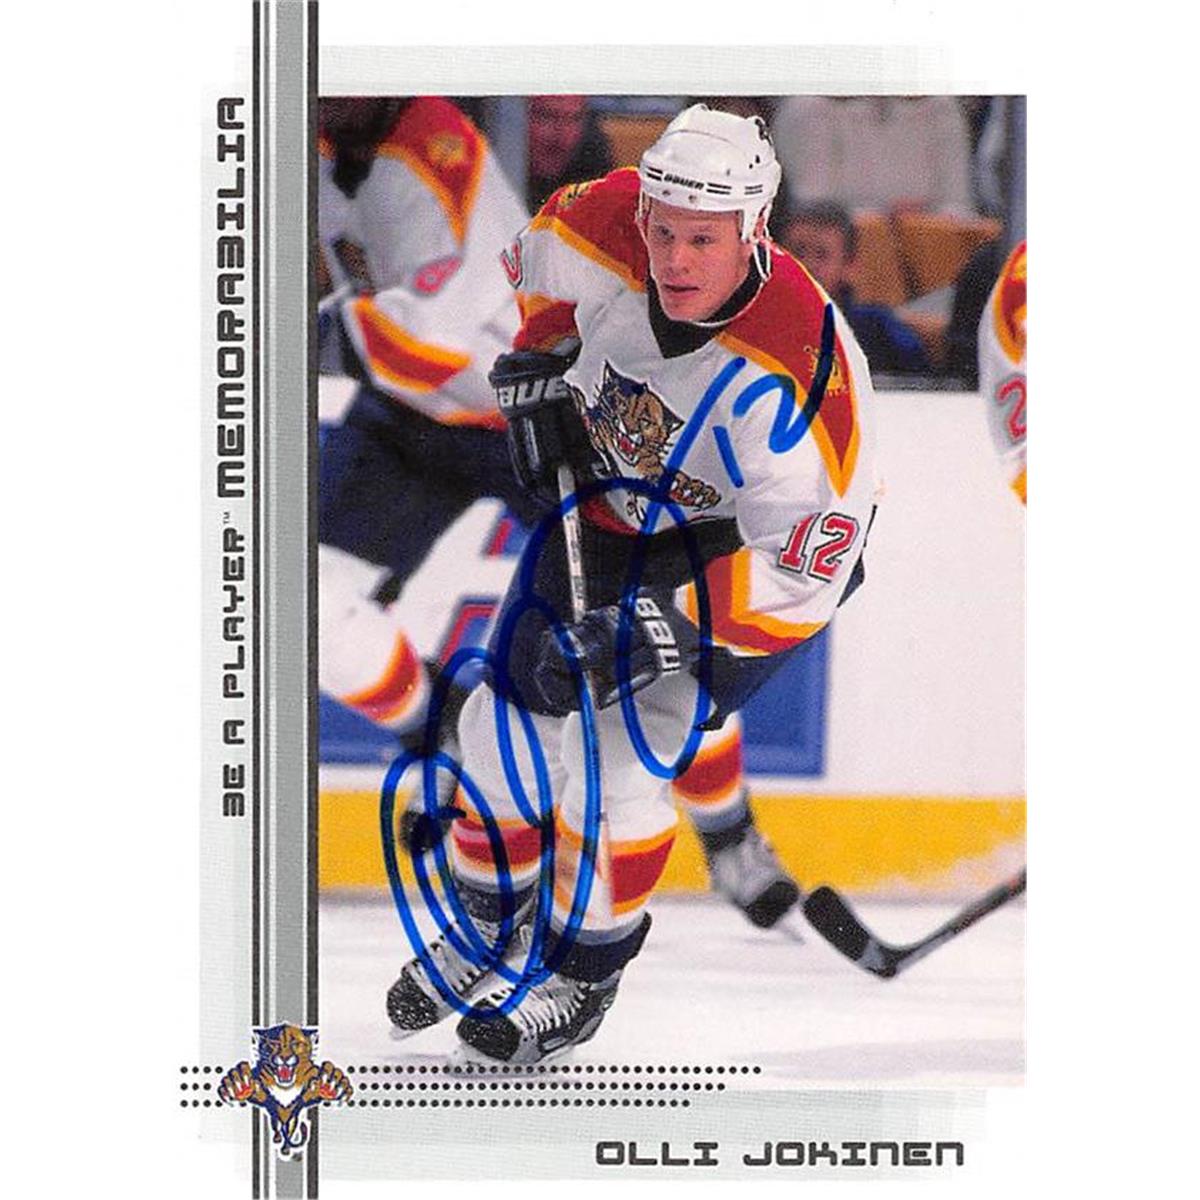 Picture of Autograph Warehouse 466124 Olli Jokinen Autographed Florida Panthers Hockey Card 2000 BAP No. 411